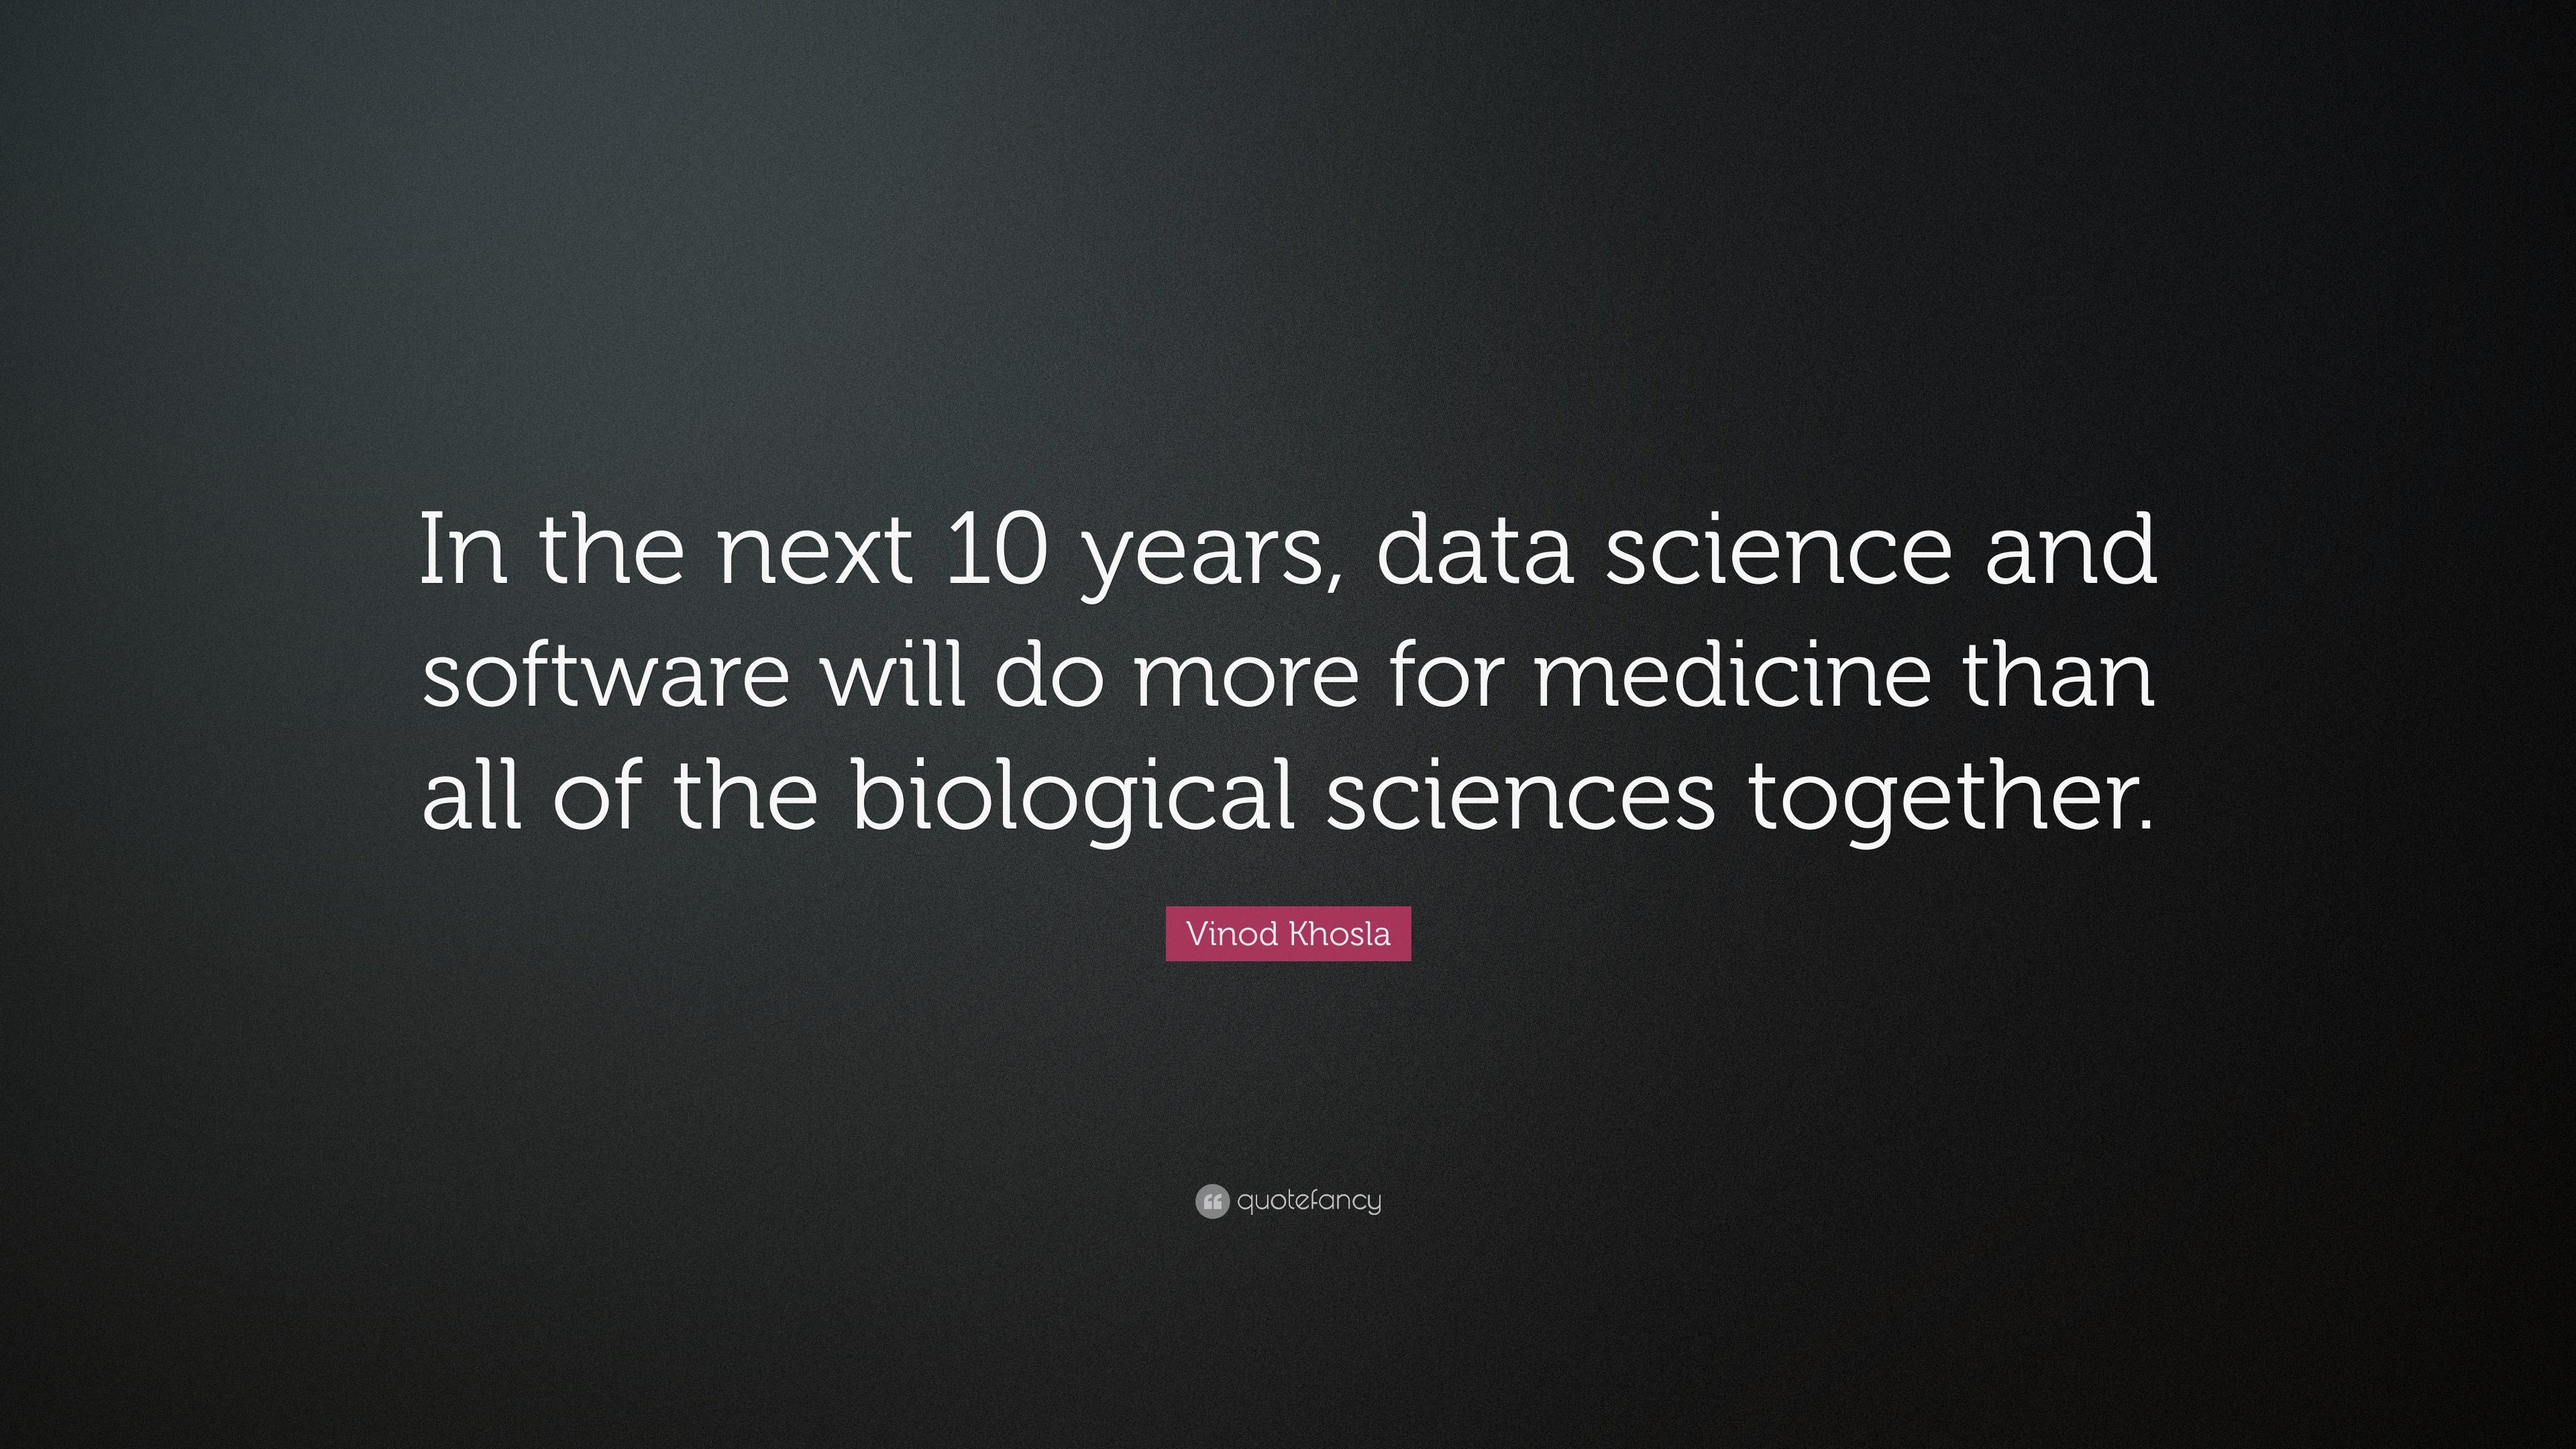 Vinod Khosla Quote: “In the next 10 years, data science